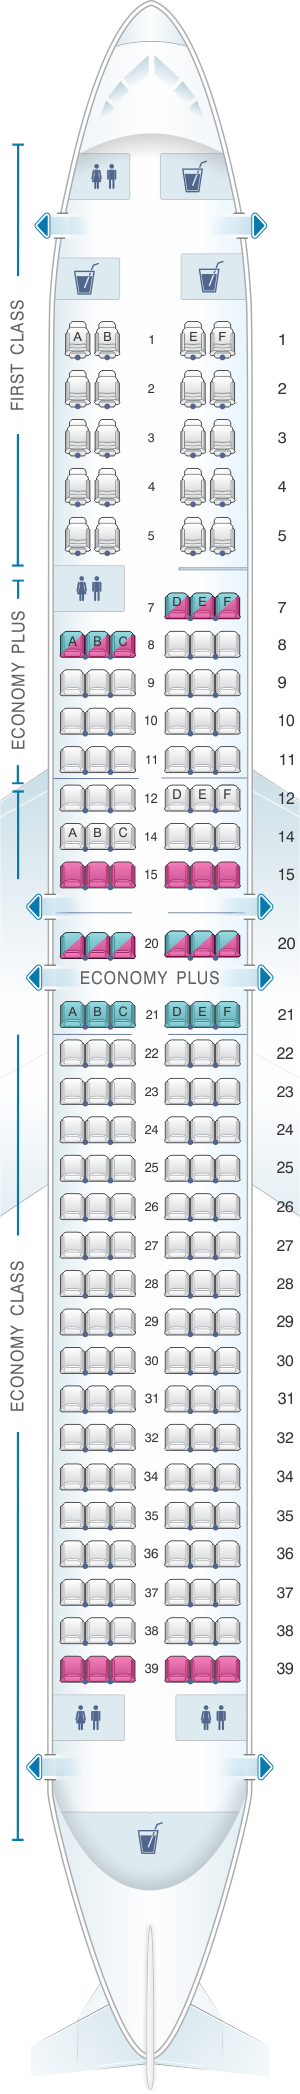 united airlines flight seat assignment